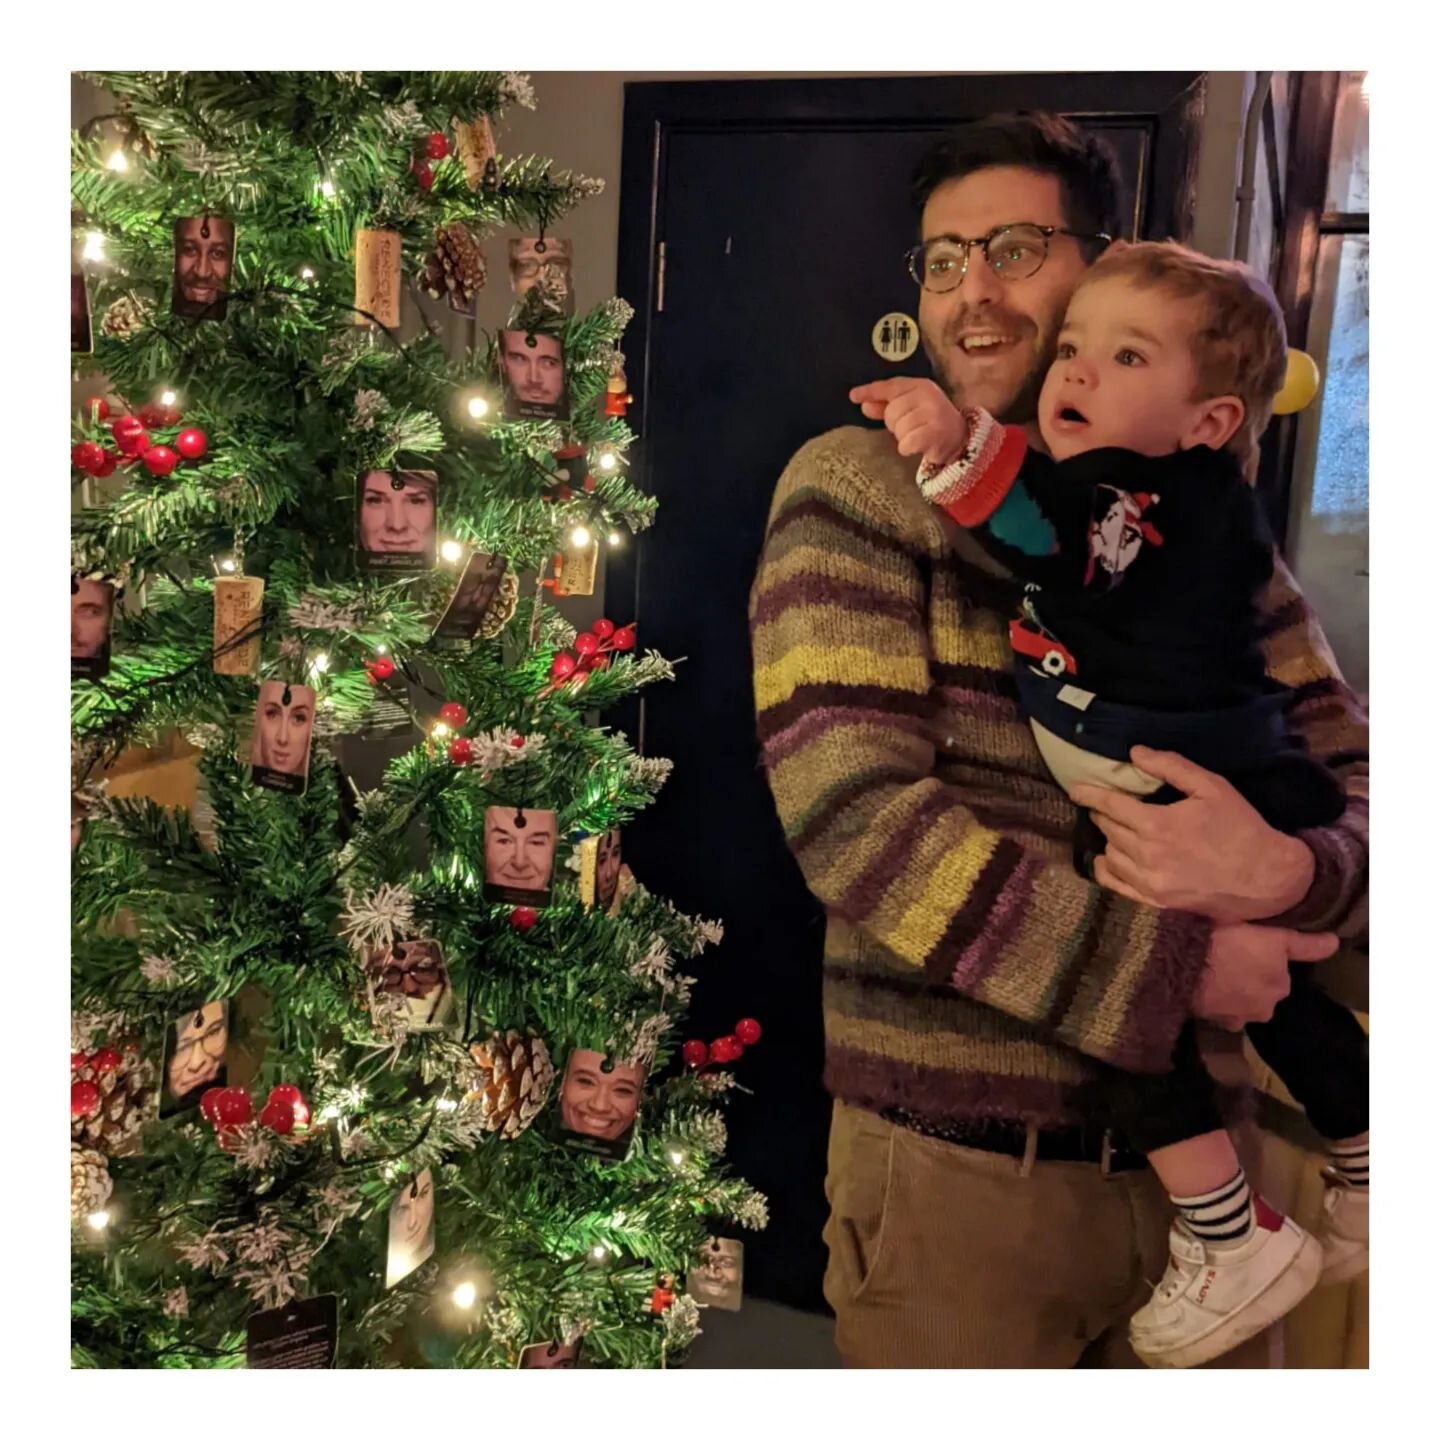 Kids adore @renegade_bethnalgreen and the Christmas tree of Renegade faces more than they love santa and presents. It's true!

Great photo @nuclear_cowgirl

Woop woop